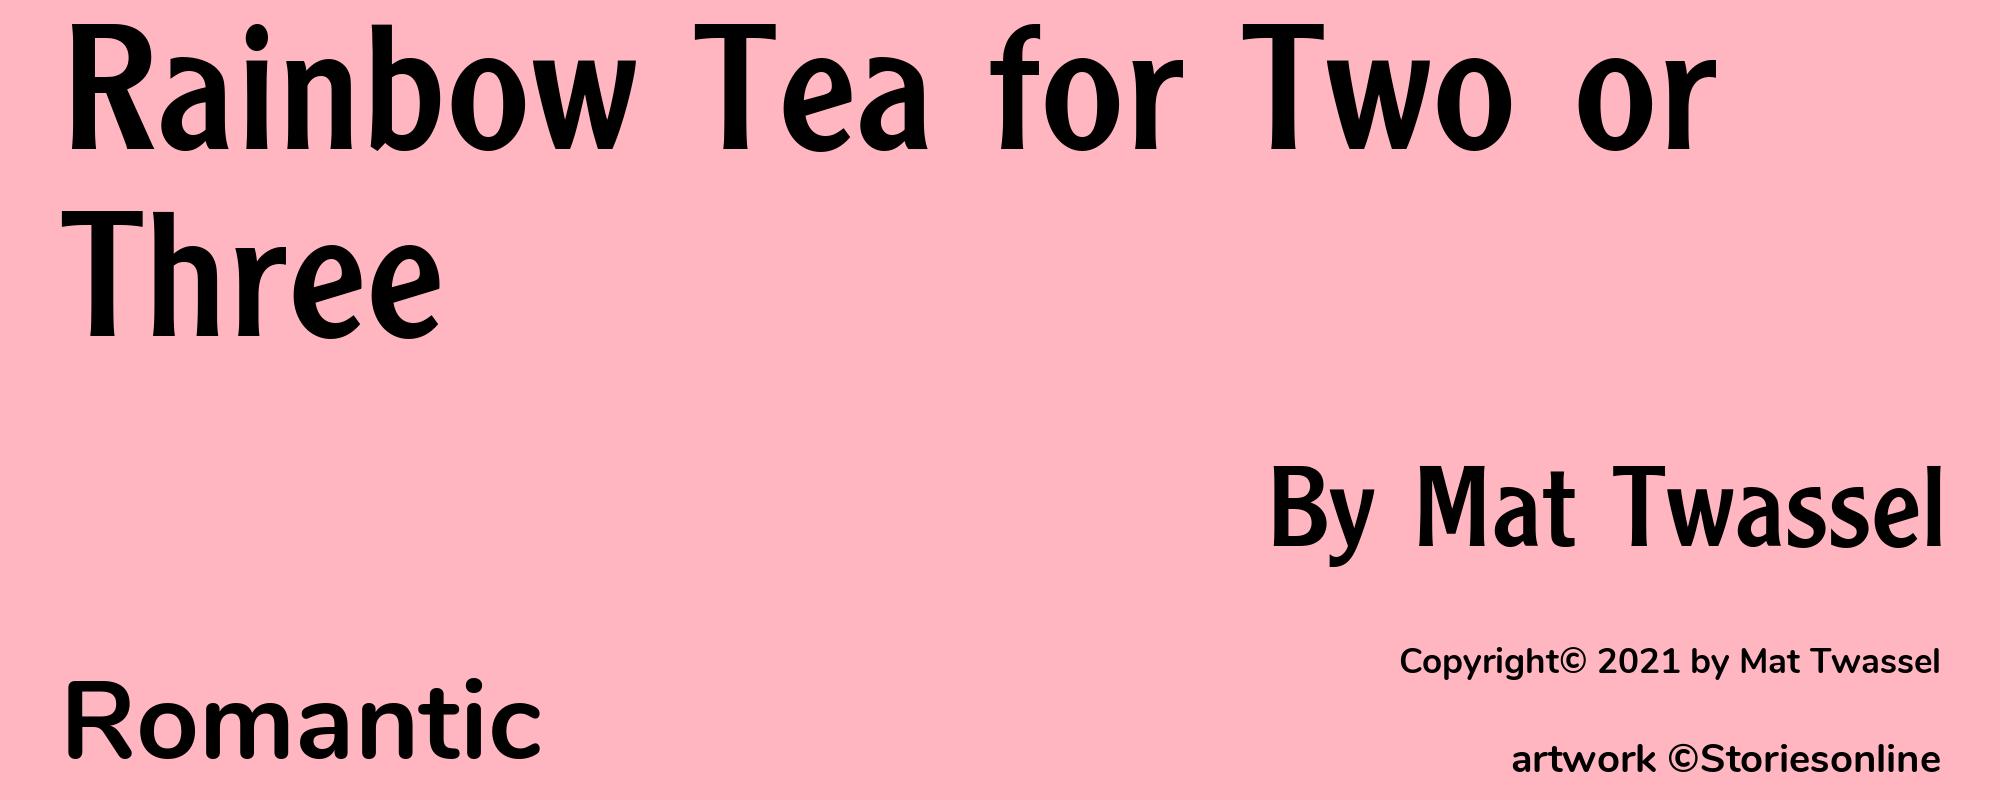 Rainbow Tea for Two or Three - Cover